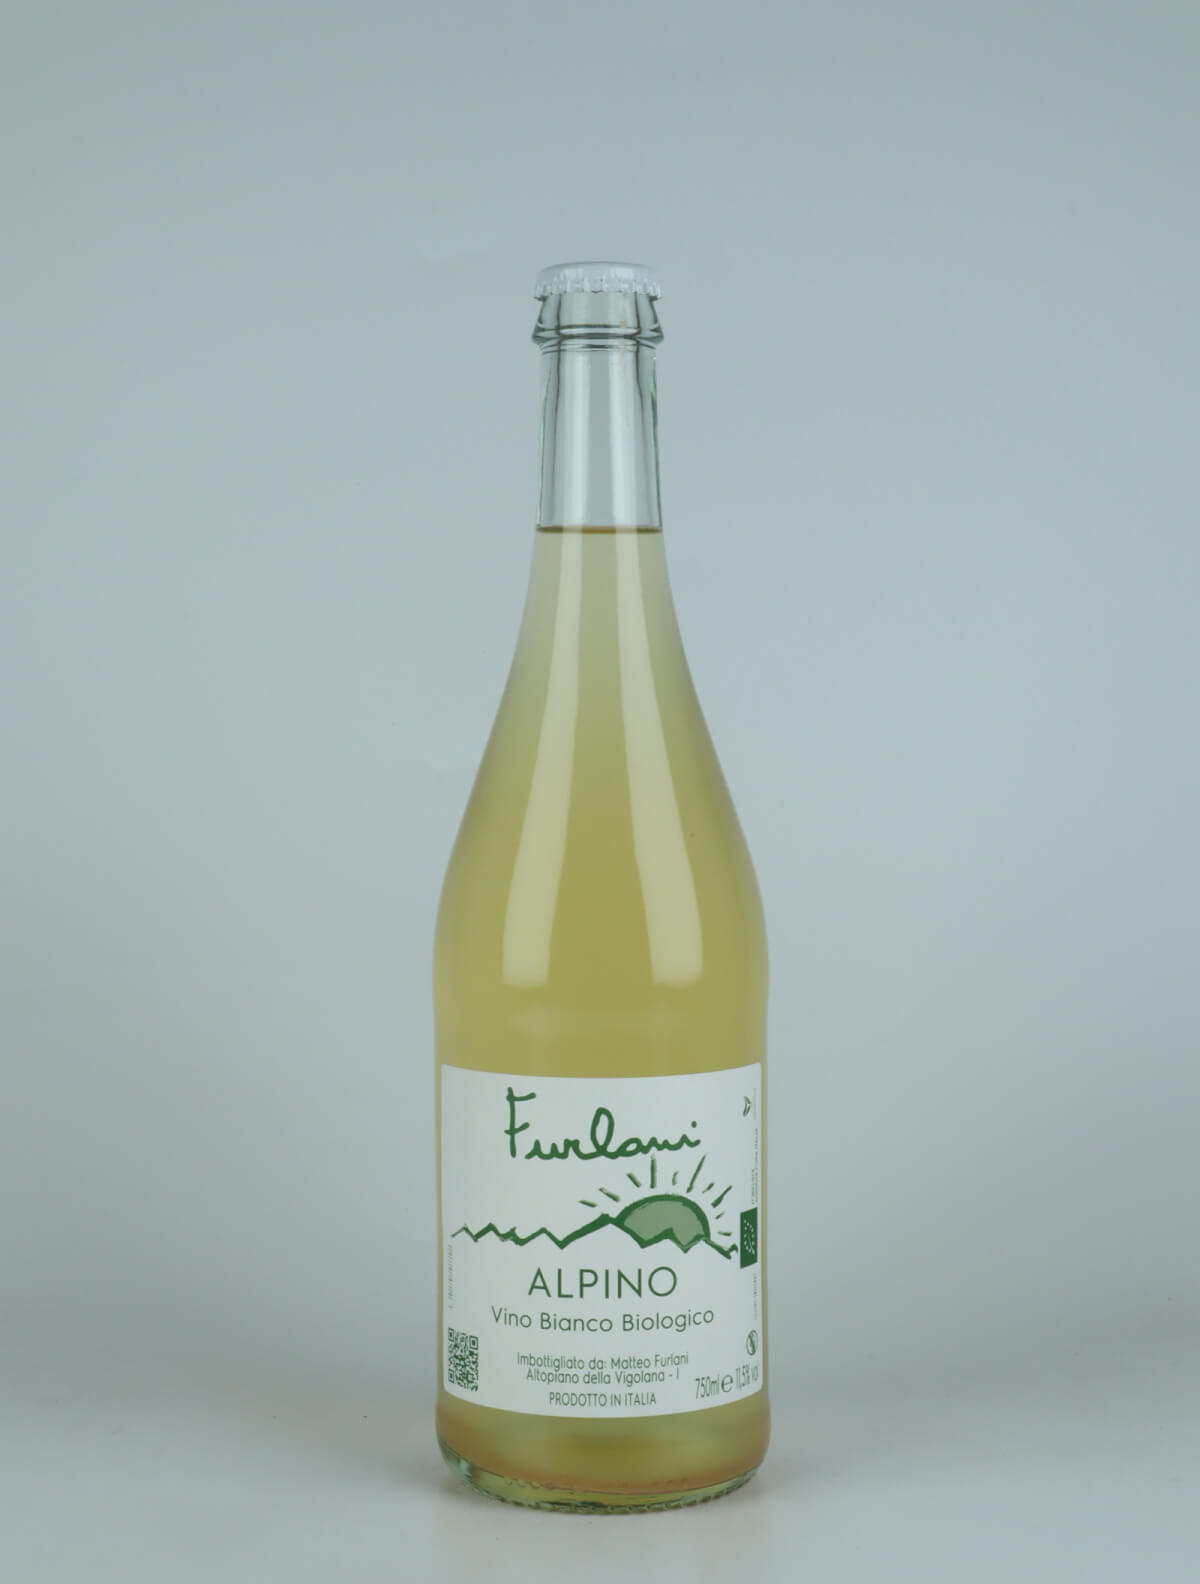 A bottle 2021 Alpino Sparkling from Cantina Furlani, Alto Adige in Italy